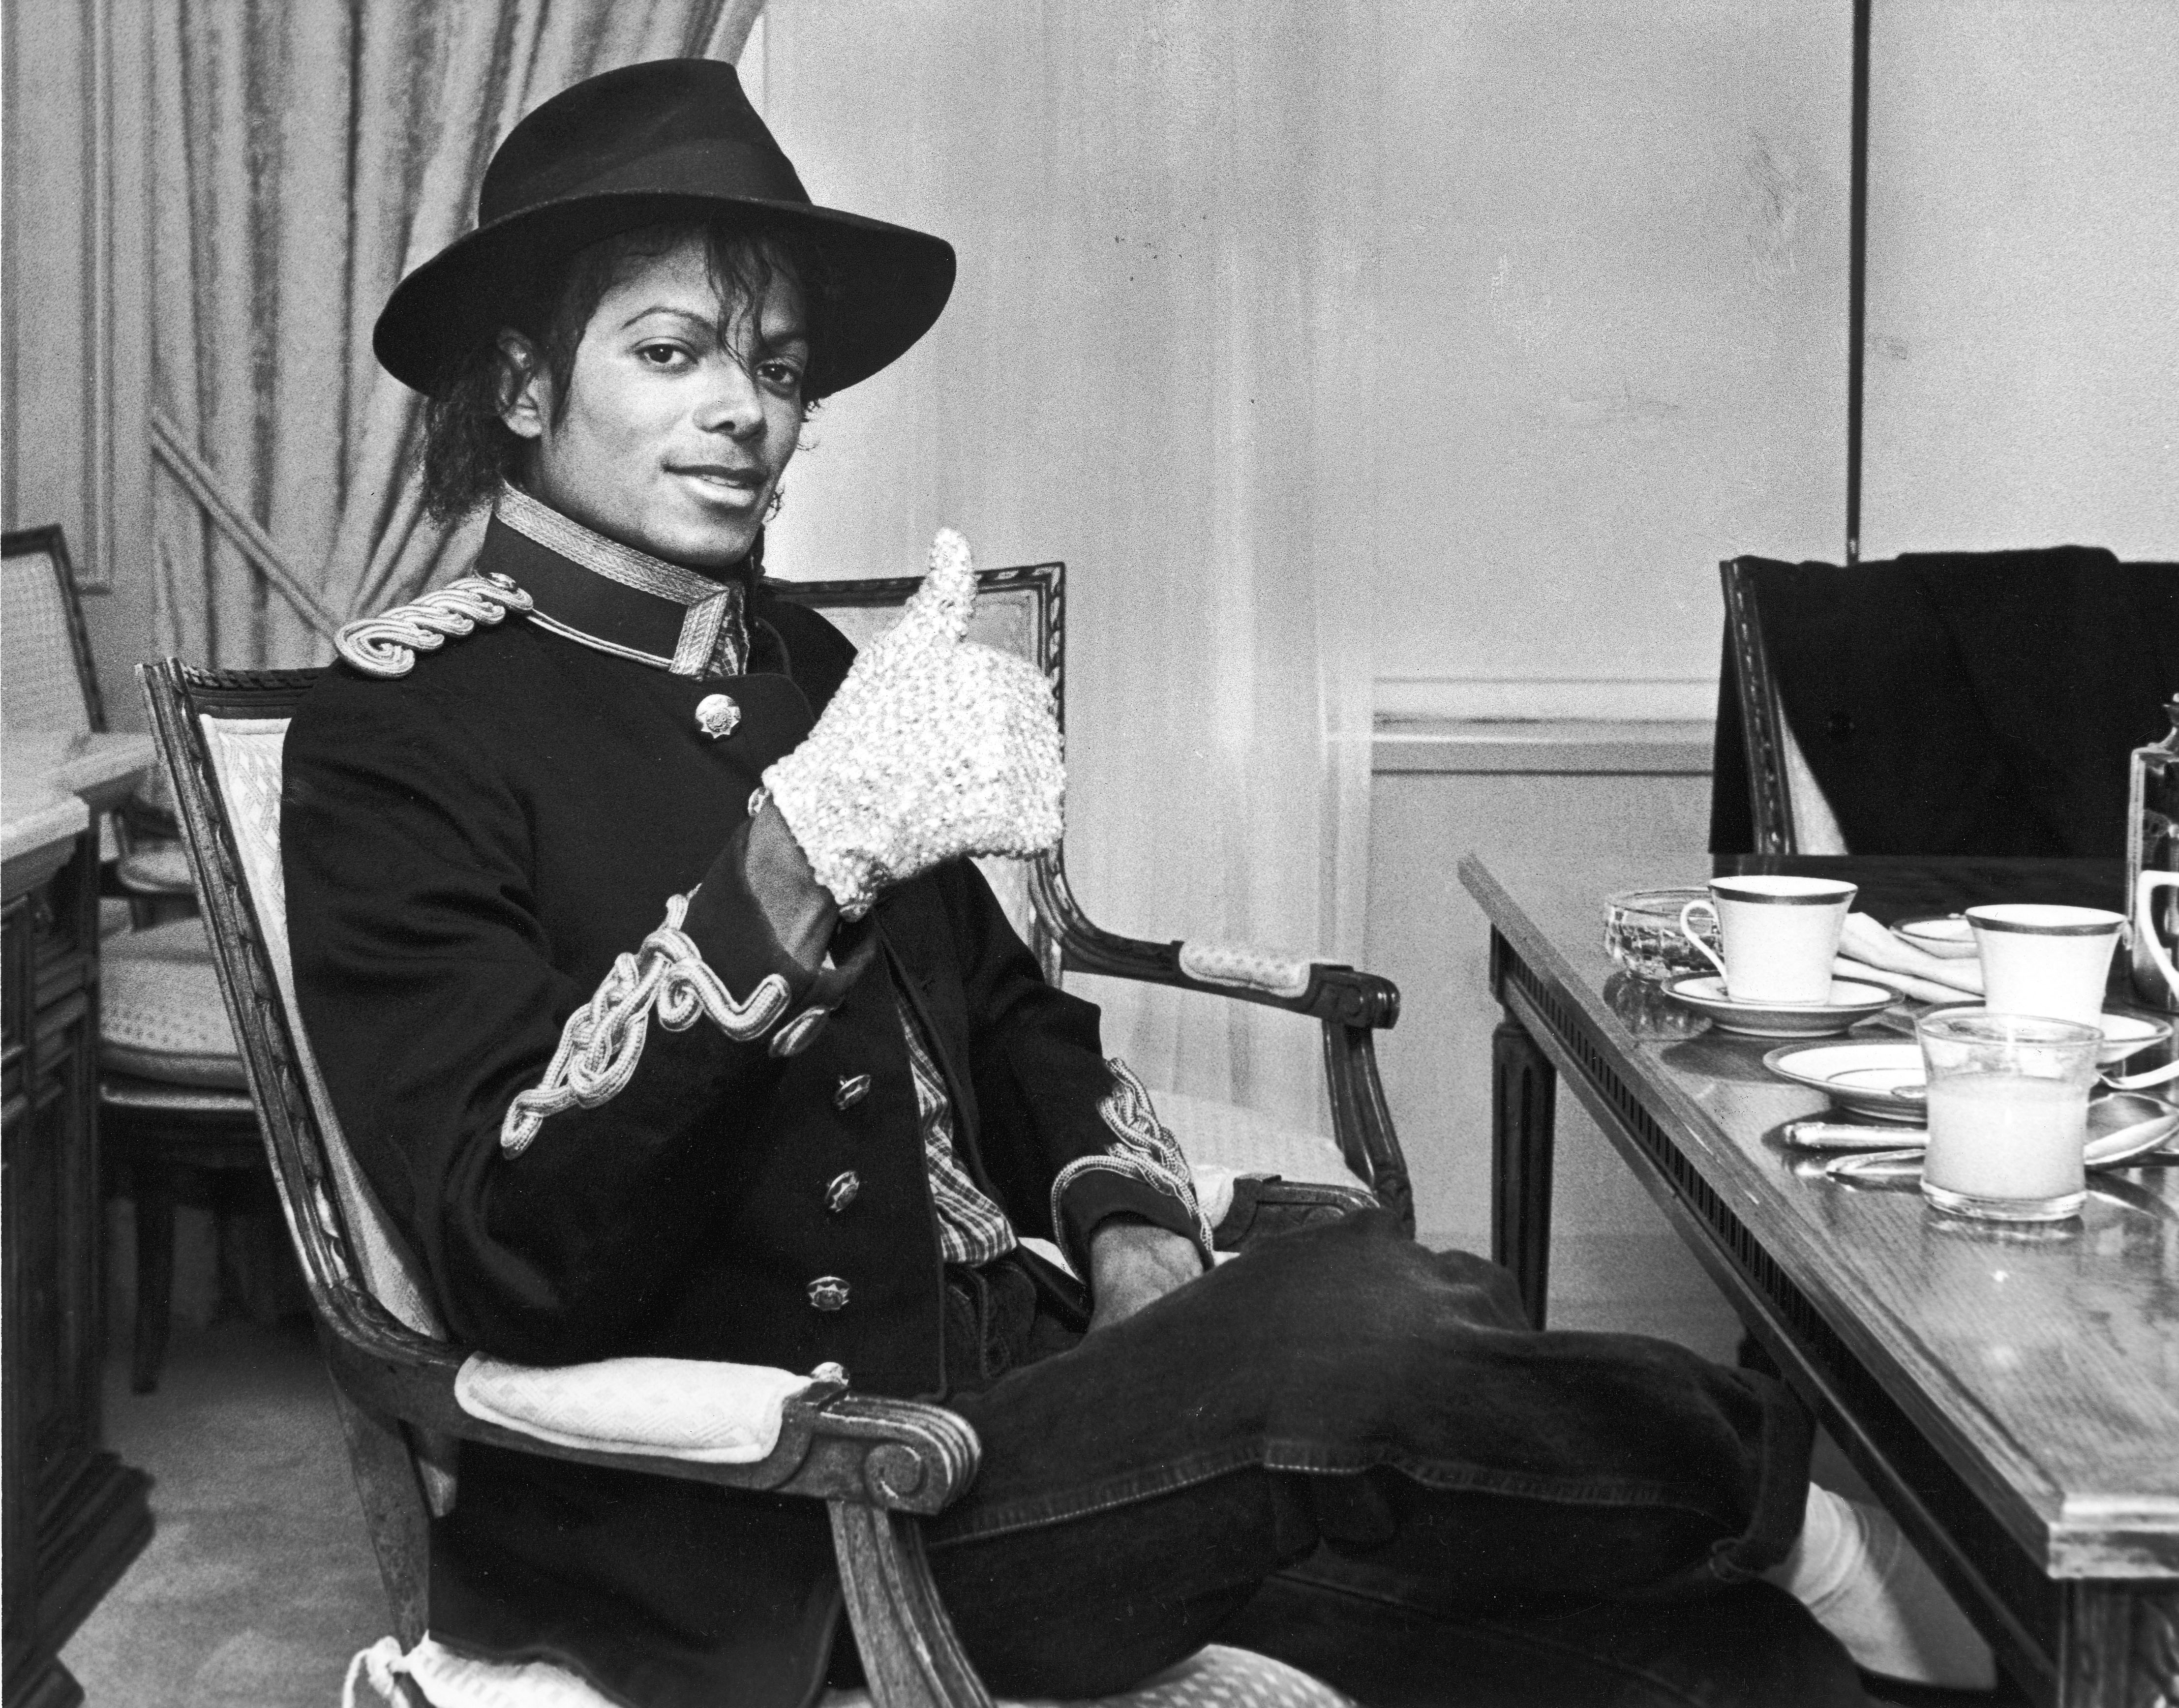 Michael Jackson wearing a glove and a hat